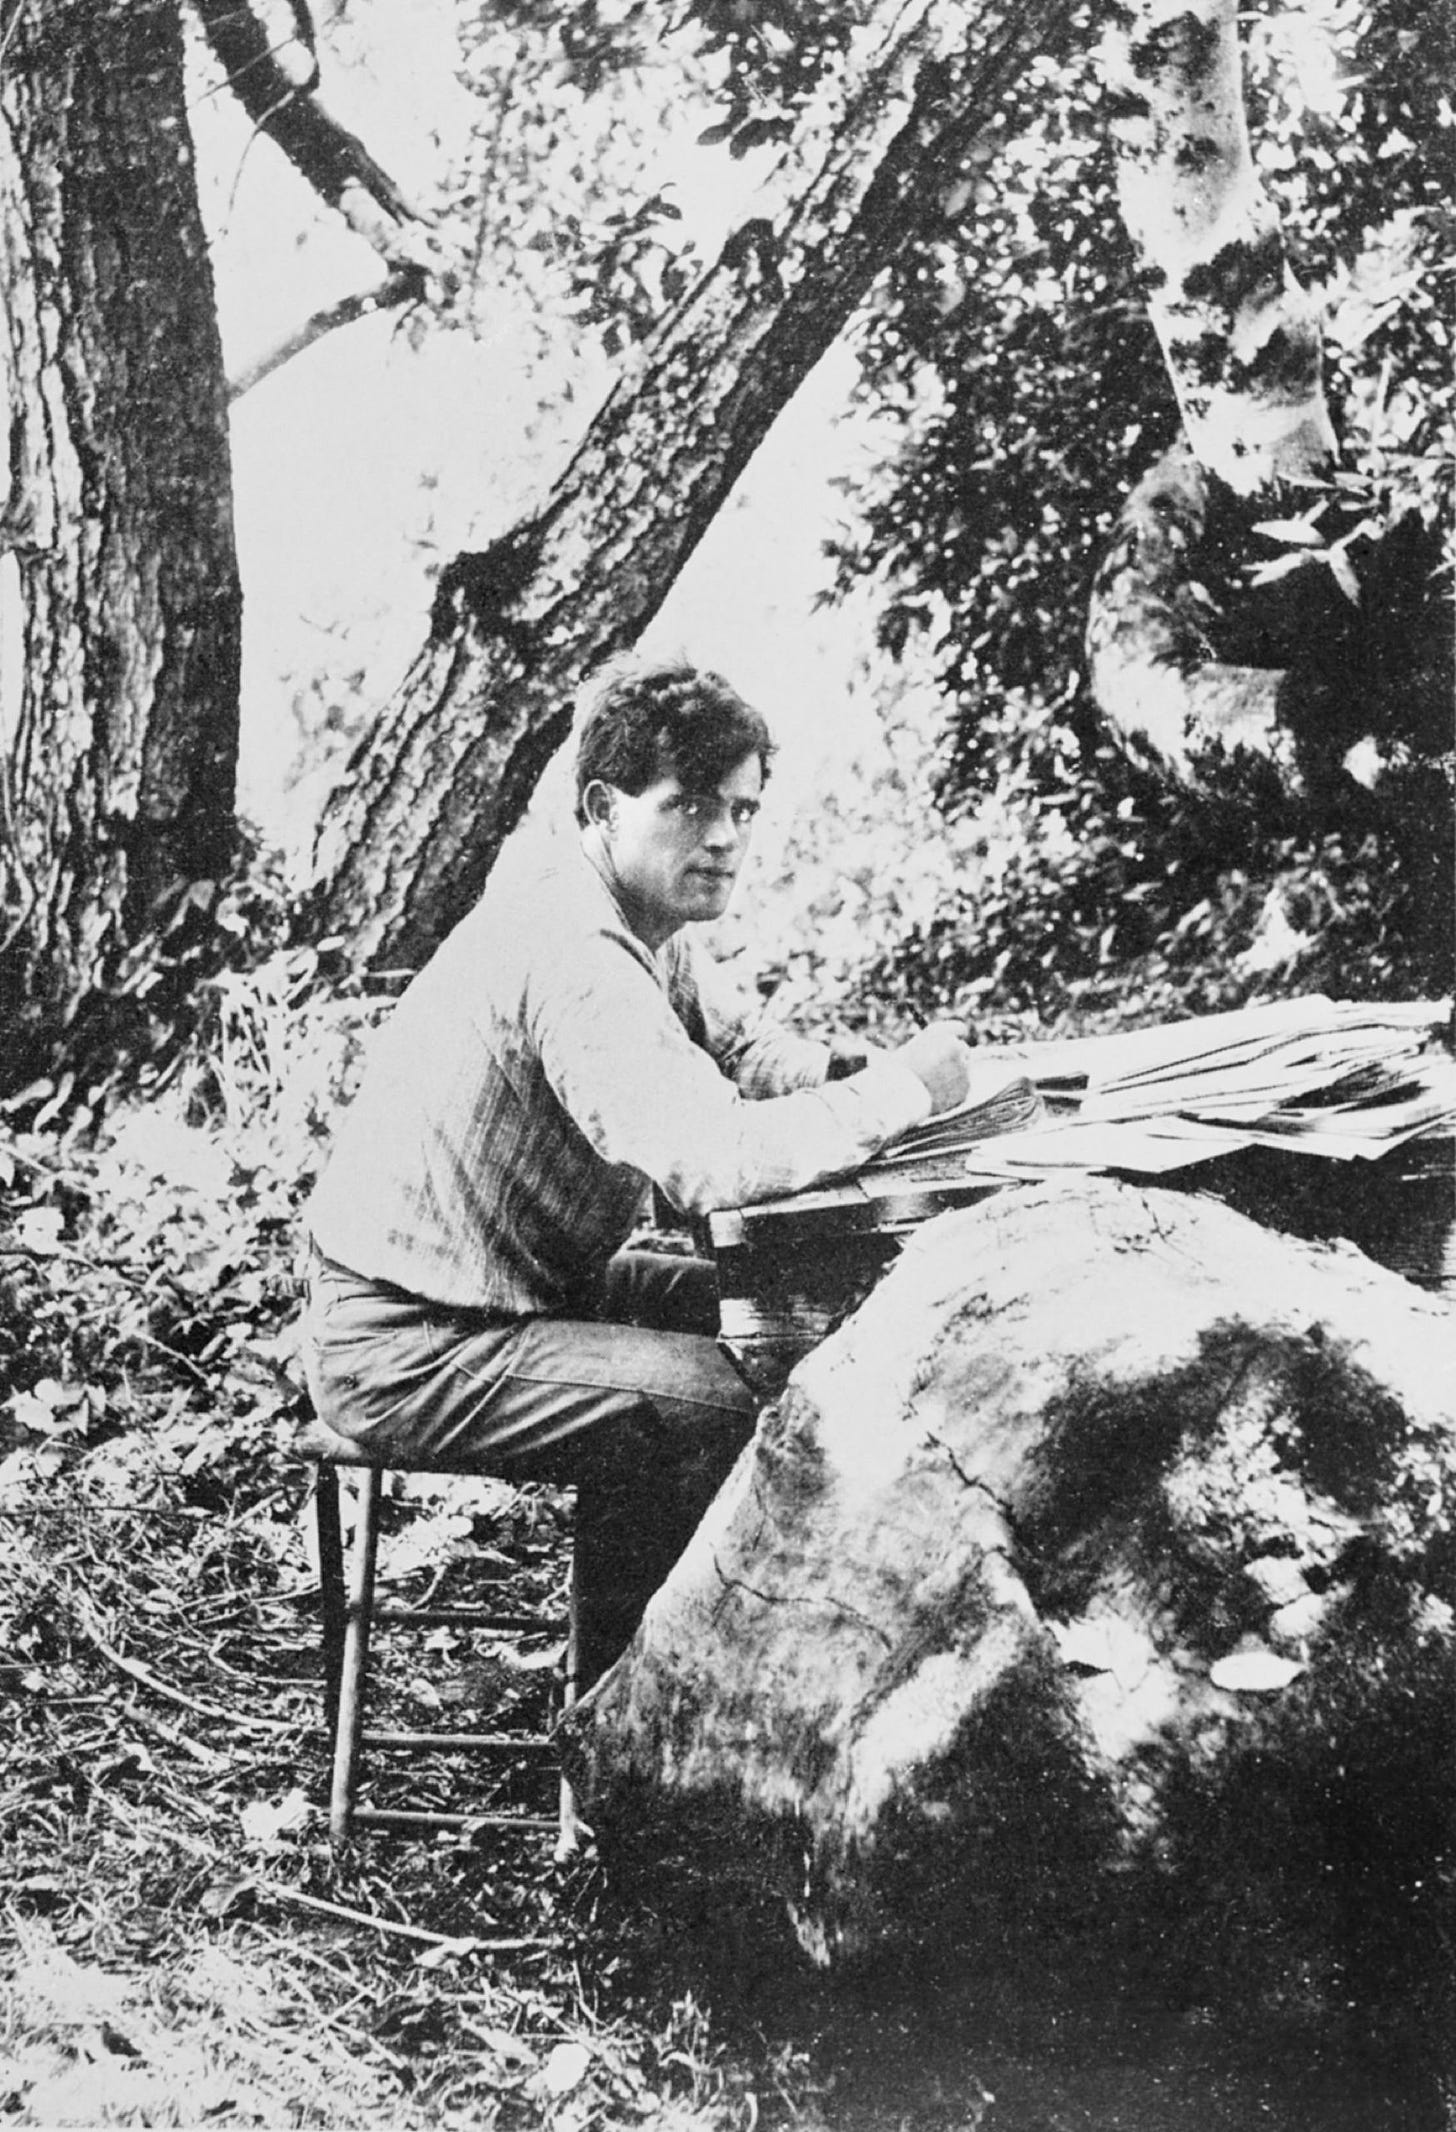 The Life and Work of Jack London | The New Yorker